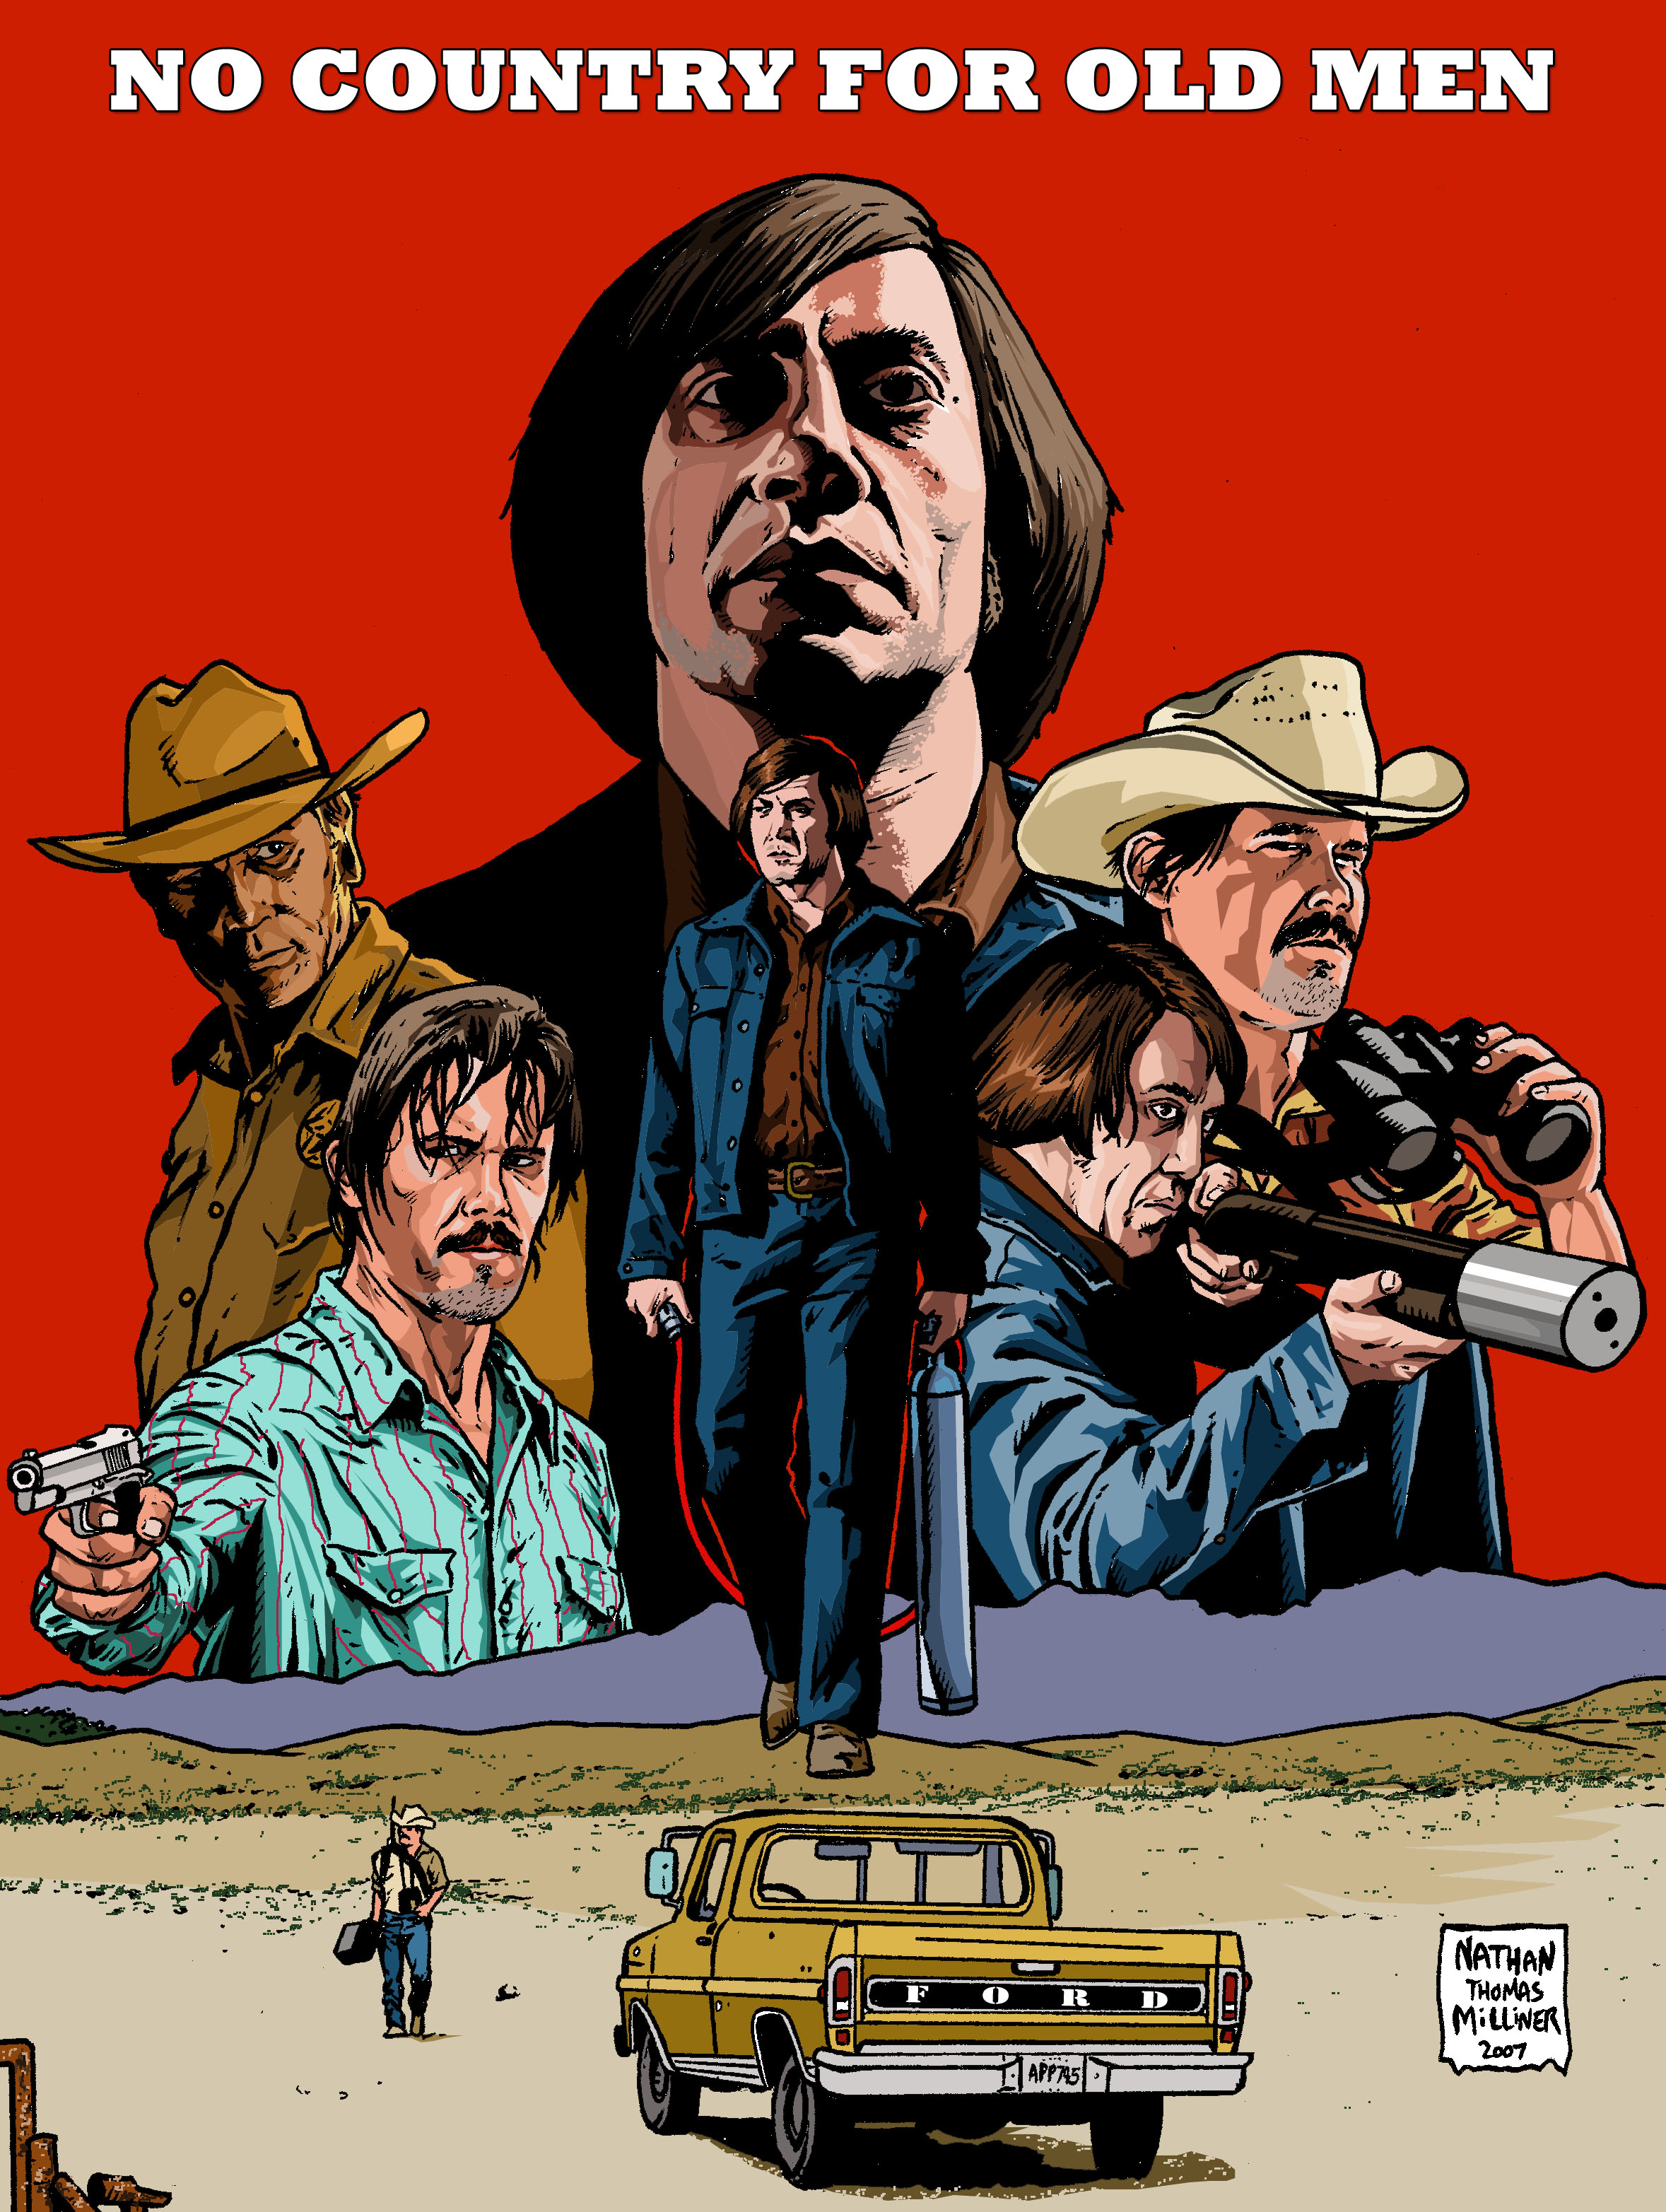 No Country for Old Men [2357x3129] : MoviePosterPorn